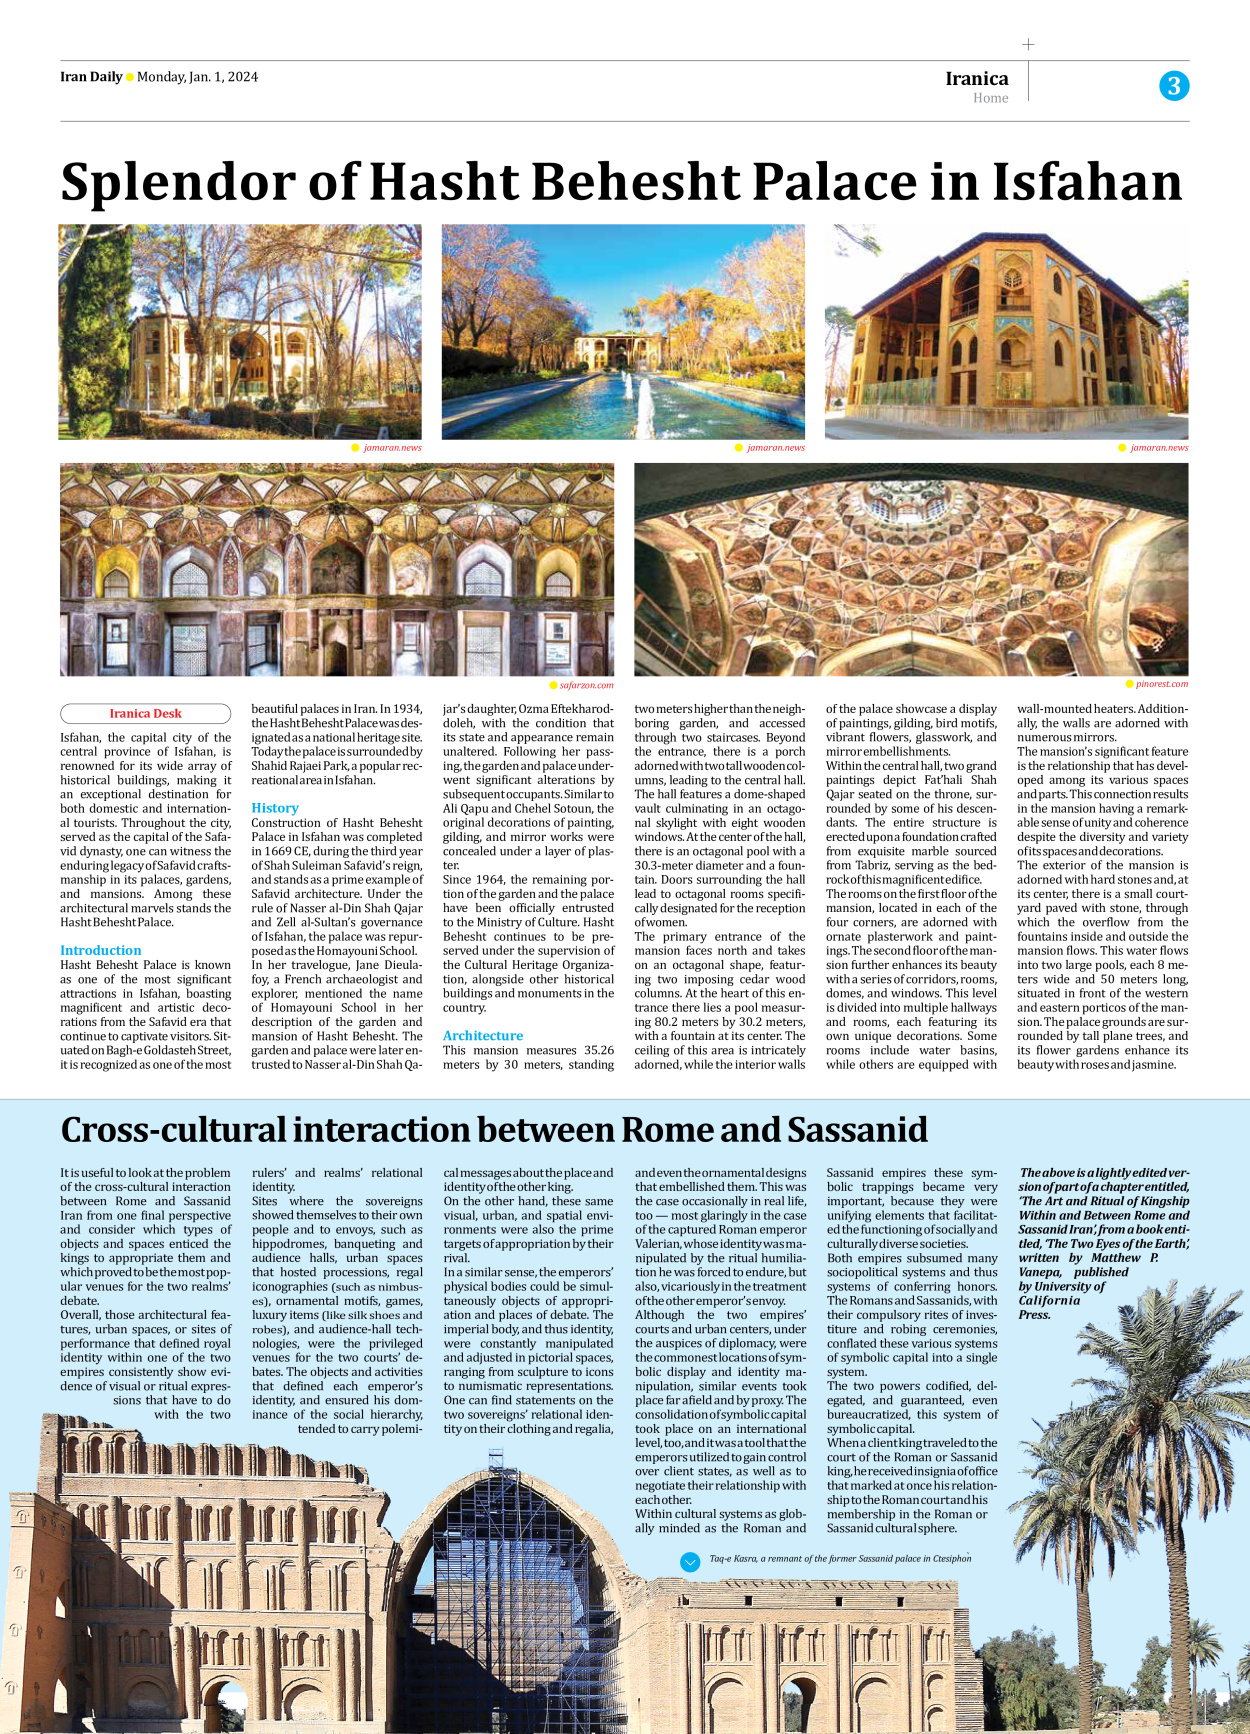 Iran Daily - Number Seven Thousand Four Hundred and Seventy Three - 01 January 2024 - Page 3